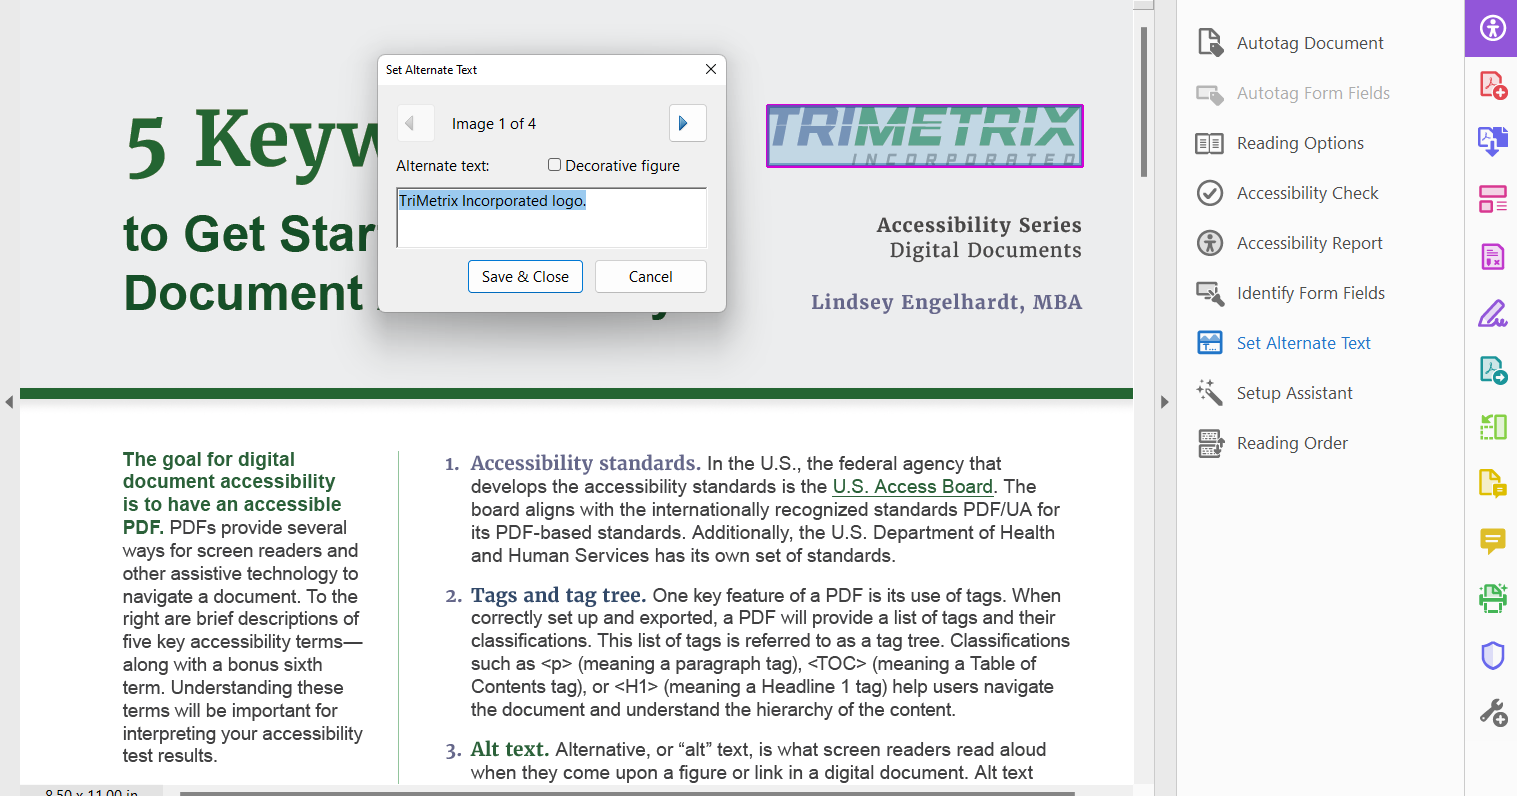 Set alt text panel in Adobe Acrobat. A logo is selected and alt text of "TriMetrix Incorporated logo" is added.